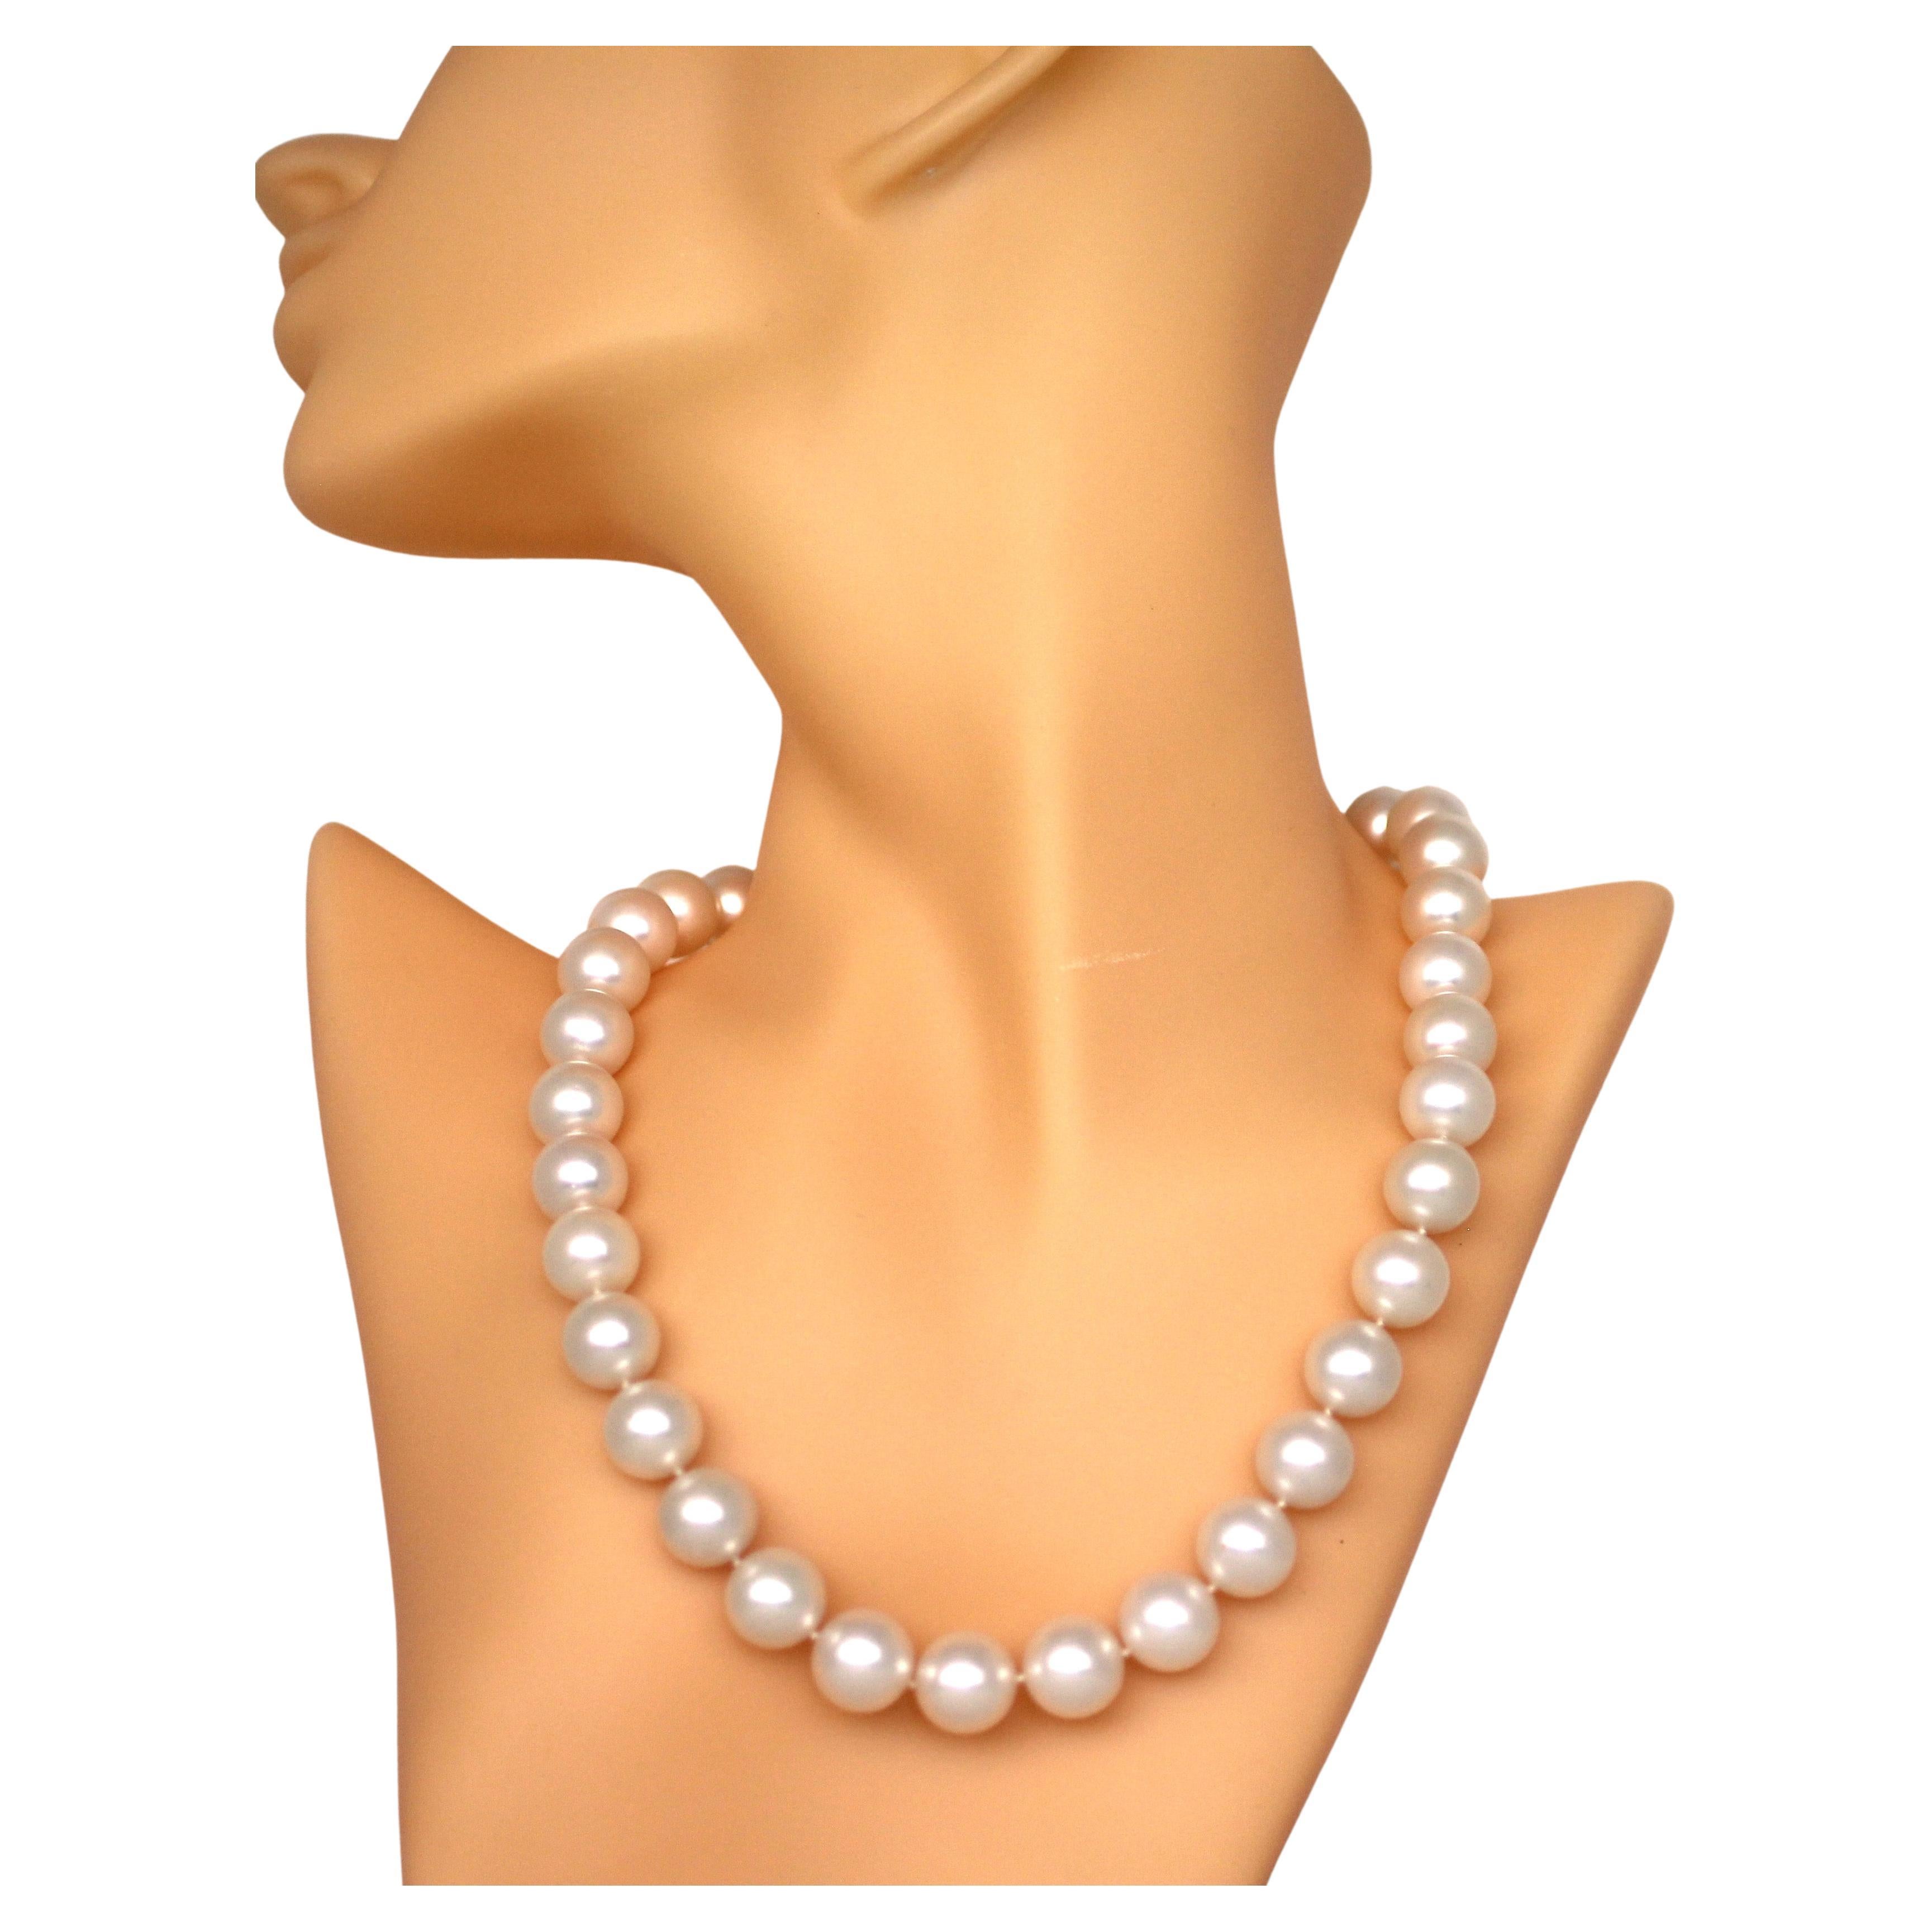 Hakimoto By Jewel Of Ocean 18K South Sea Strand Necklace
18K White Gold  
Weight (g): 95.6
Cultured South Sea Pearl 
Pearl Size: 13X12mm 
Pearl Shape: Round 
Body color: White 
Orient: Very Good
Luster: Very Good 
Surface: Very Clean
Nacre: Very